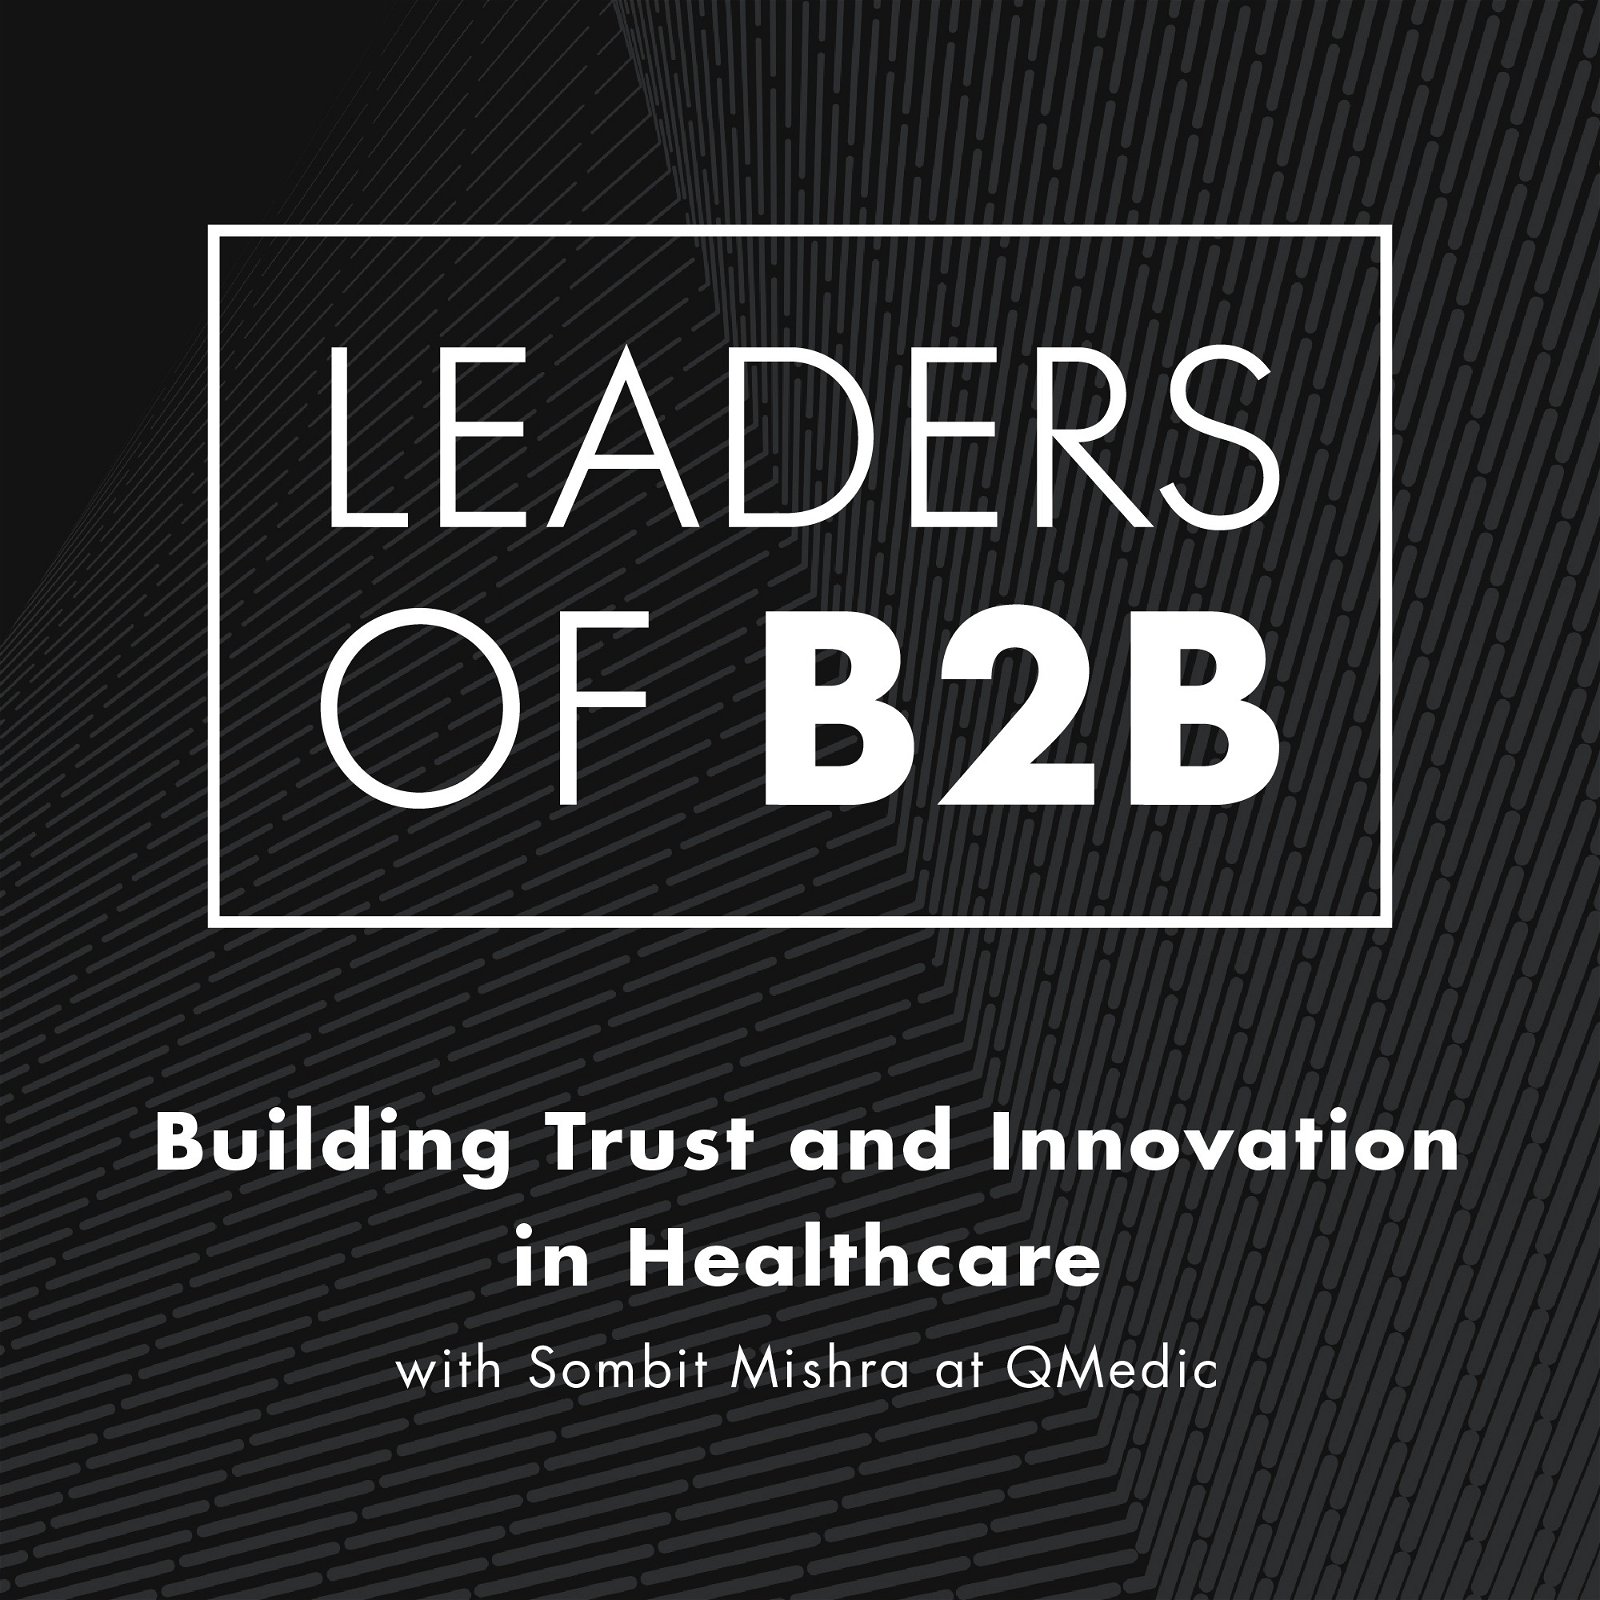 Building Trust and Innovation in Healthcare with Sombit Mishra of QMedic